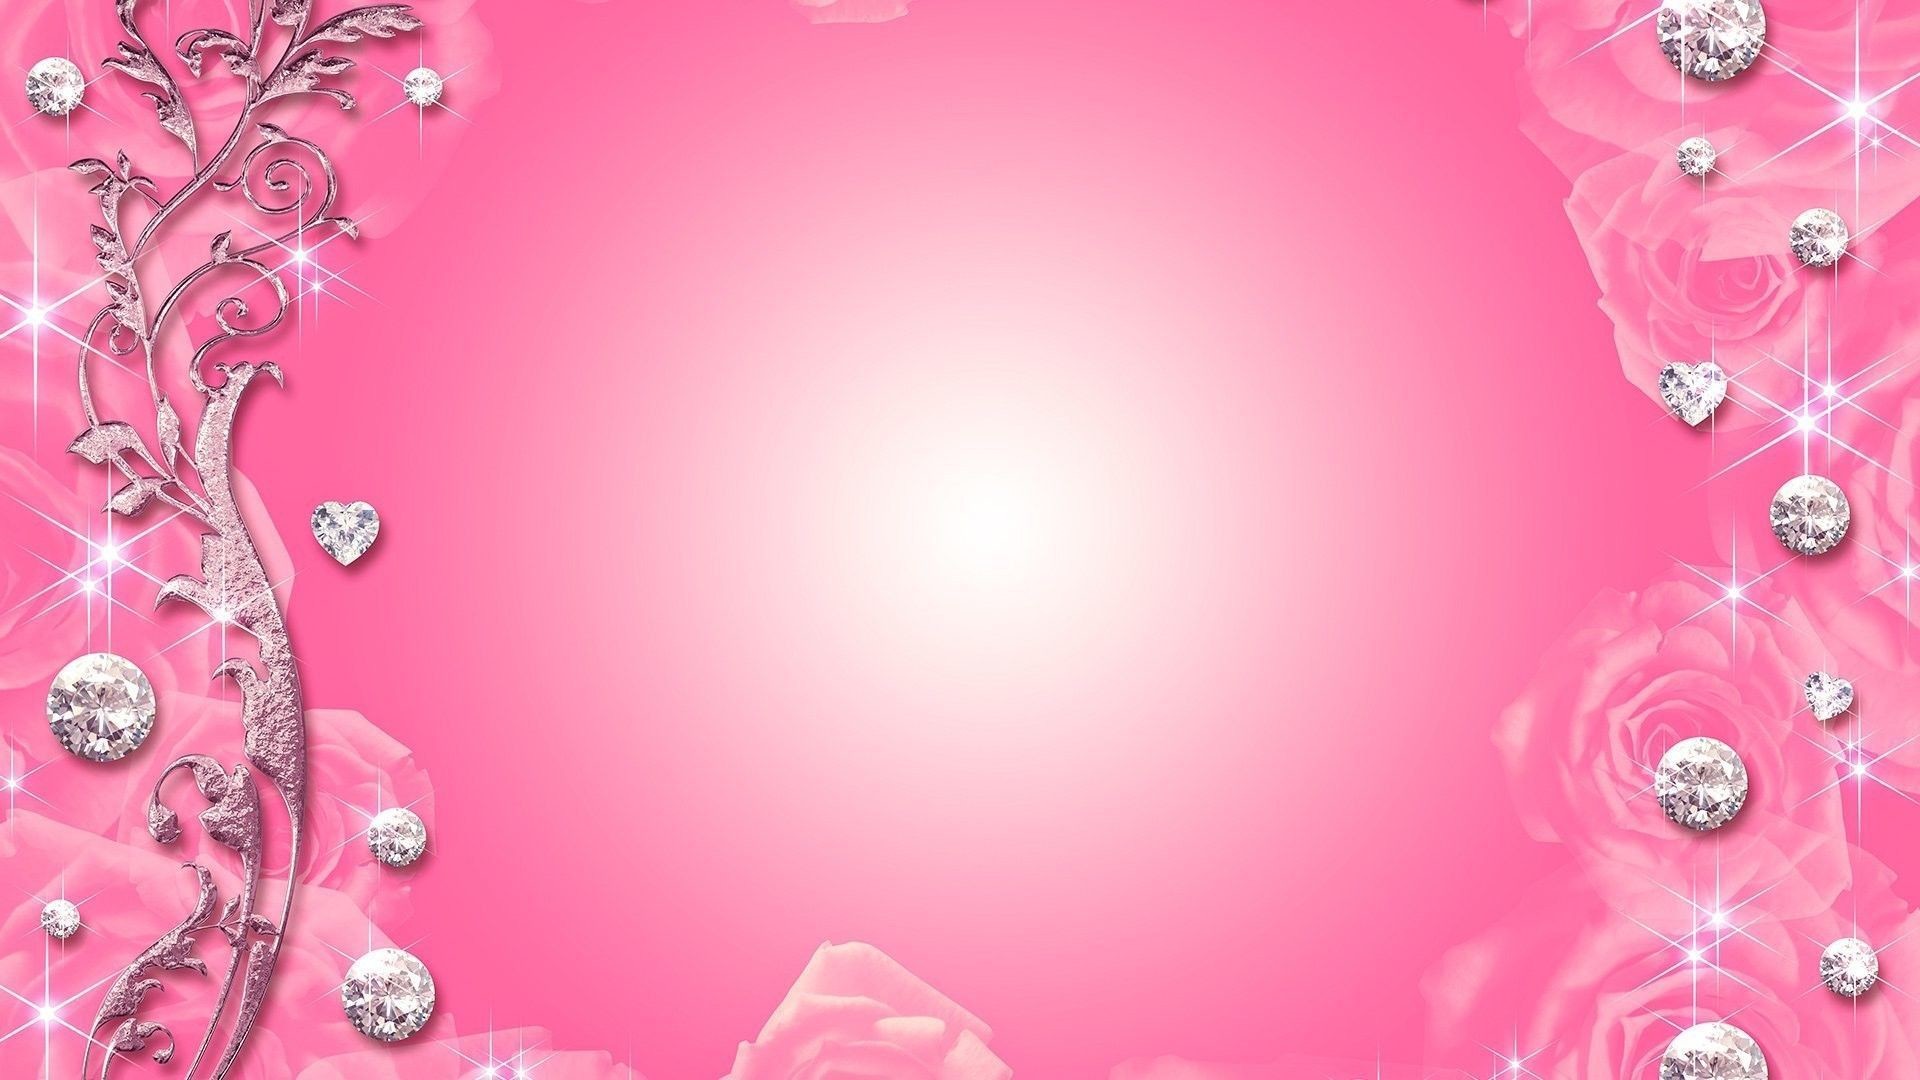 1920x1080 Pink Wallpaper - Backgrounds Free Images